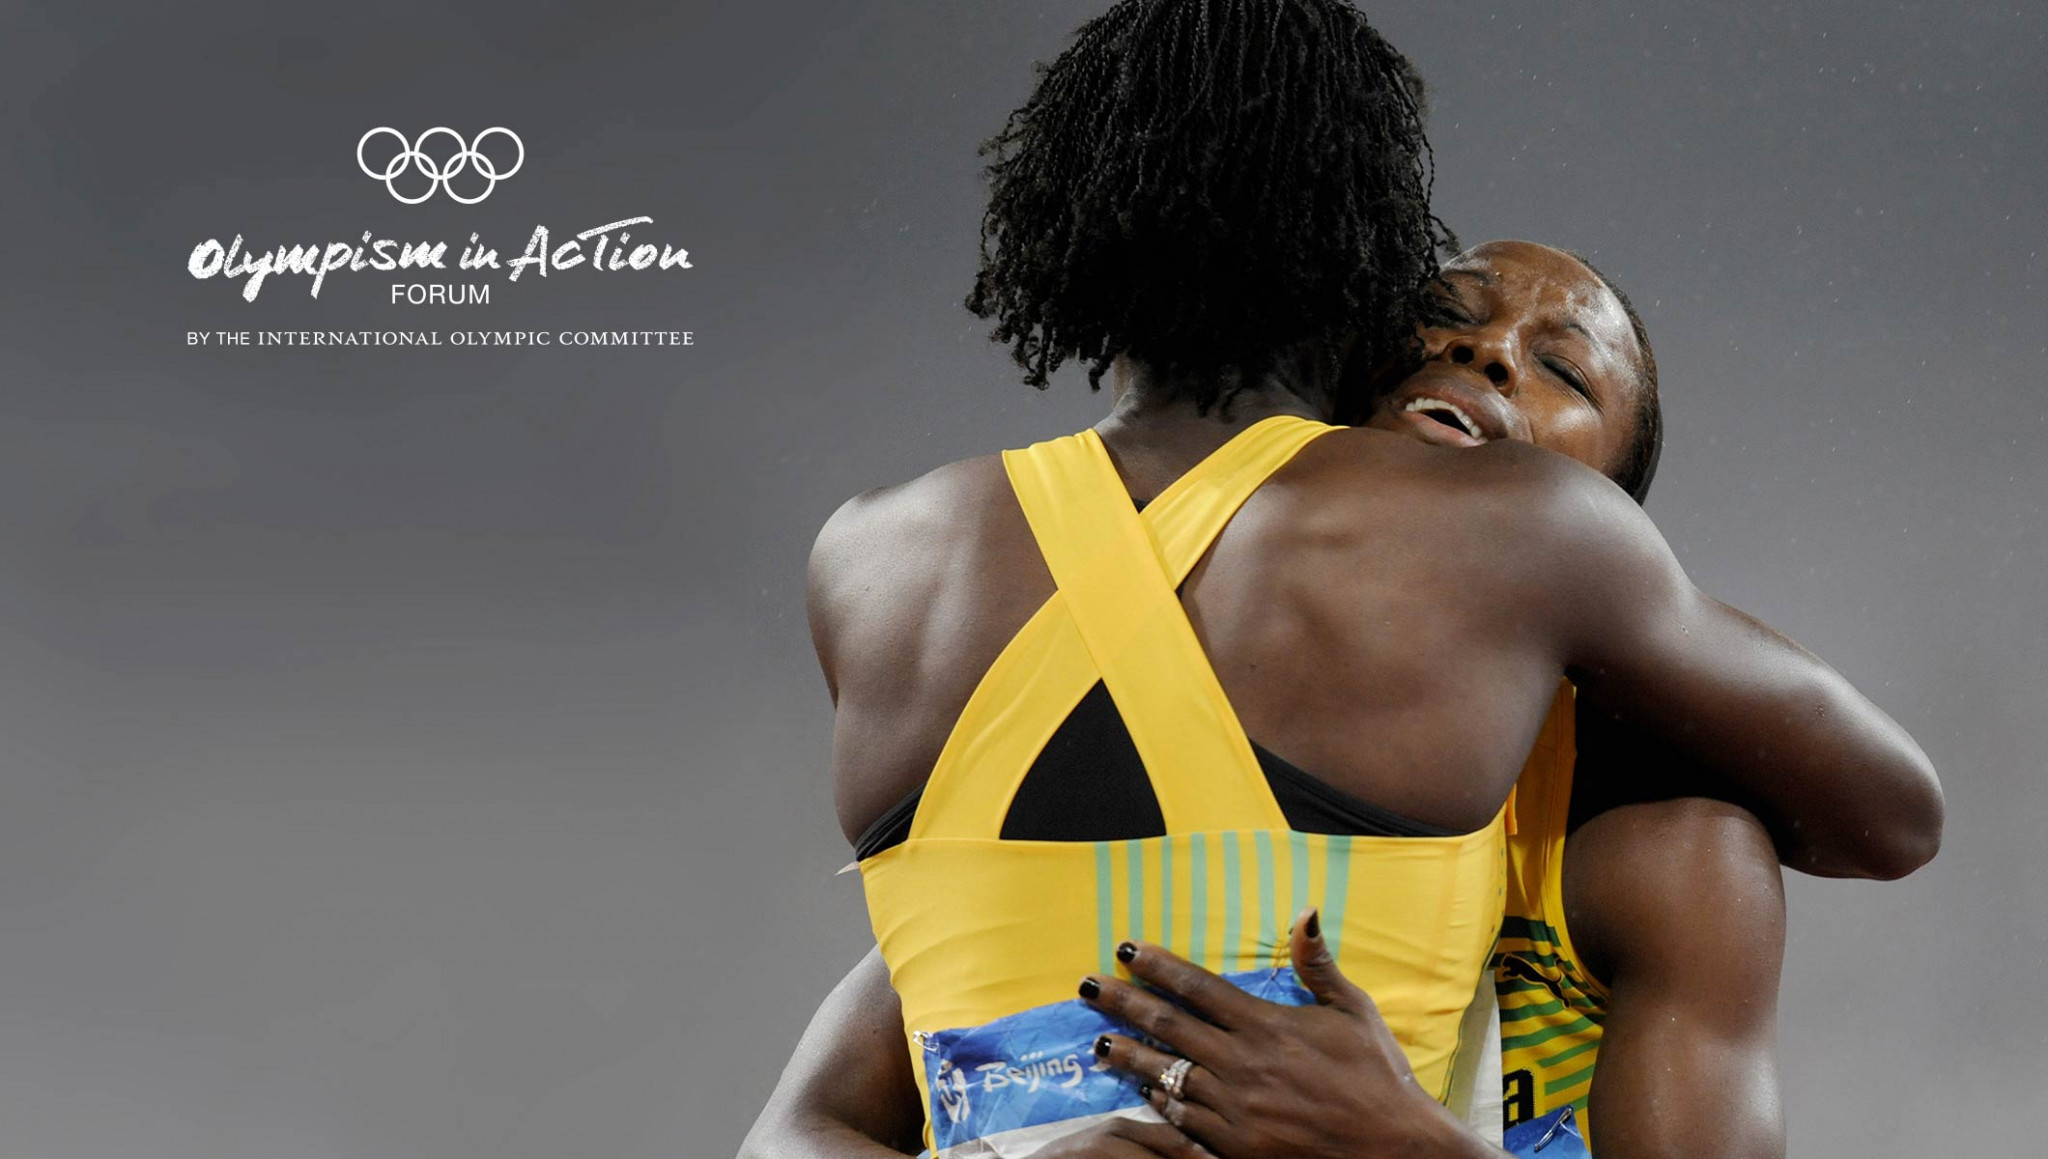 The first Olympism in Action Forum will take place in October ©IOC